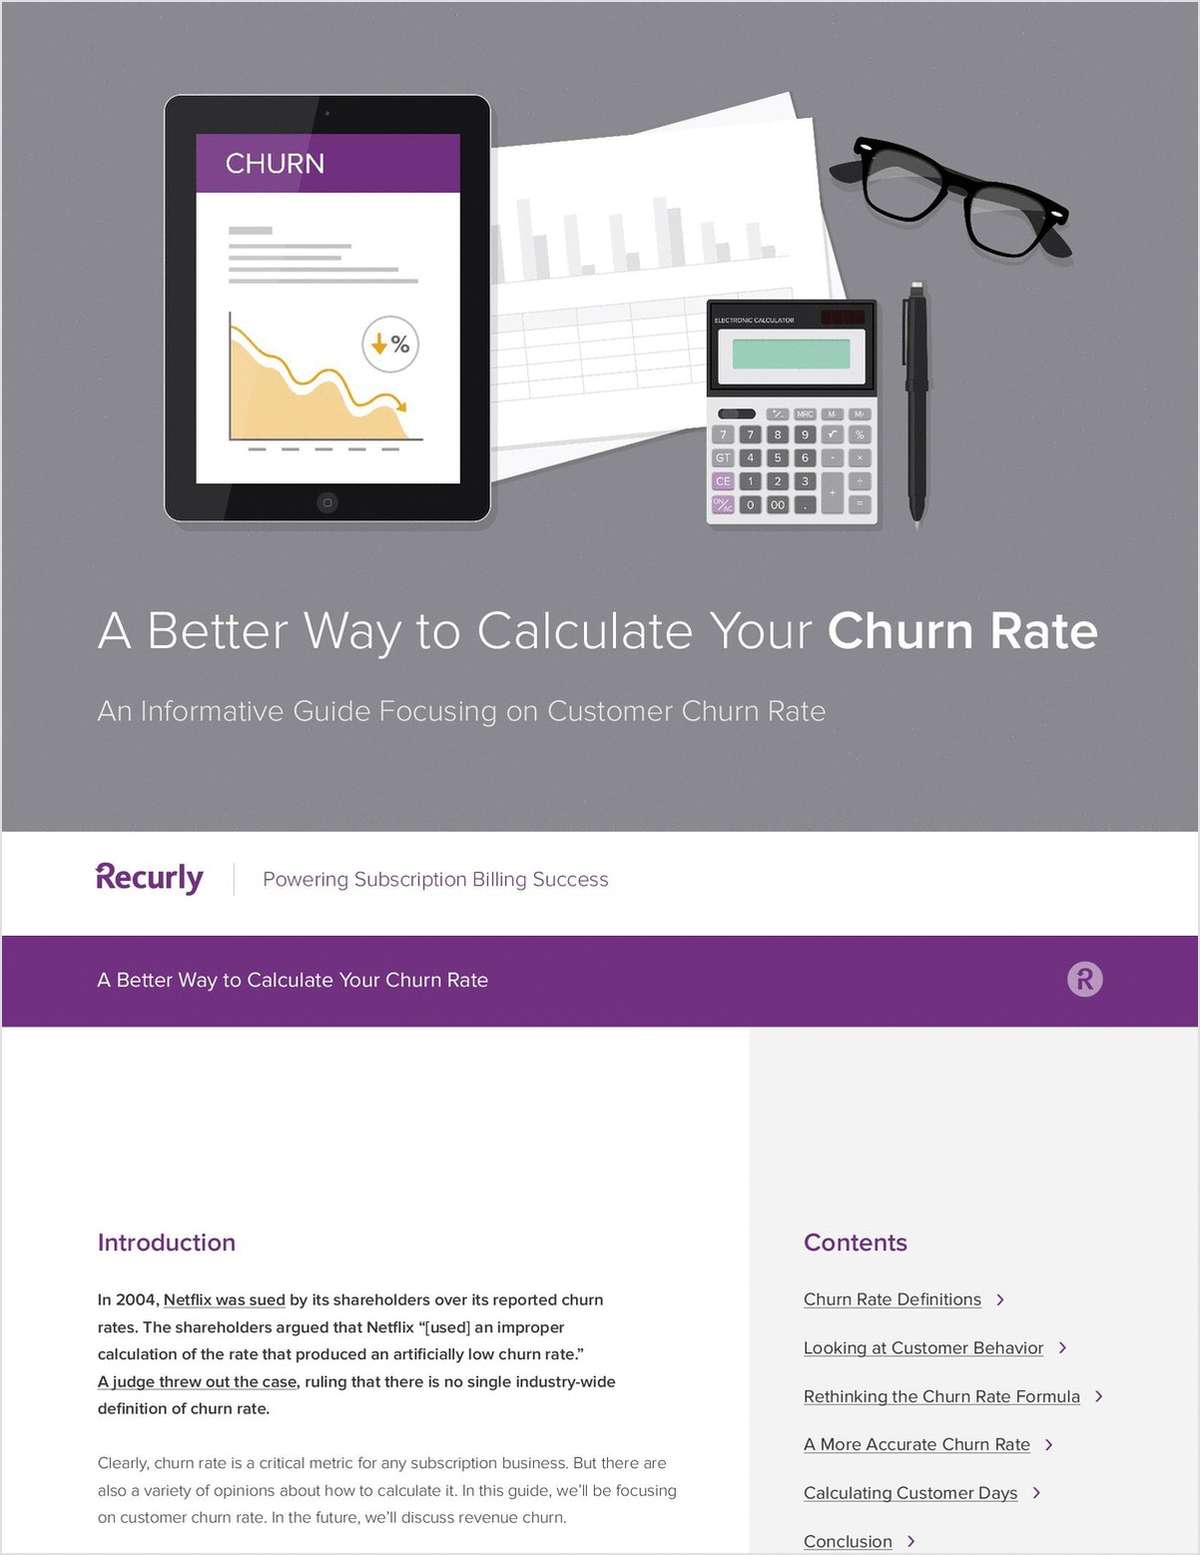 A Better Way to Calculate Your Churn Rate